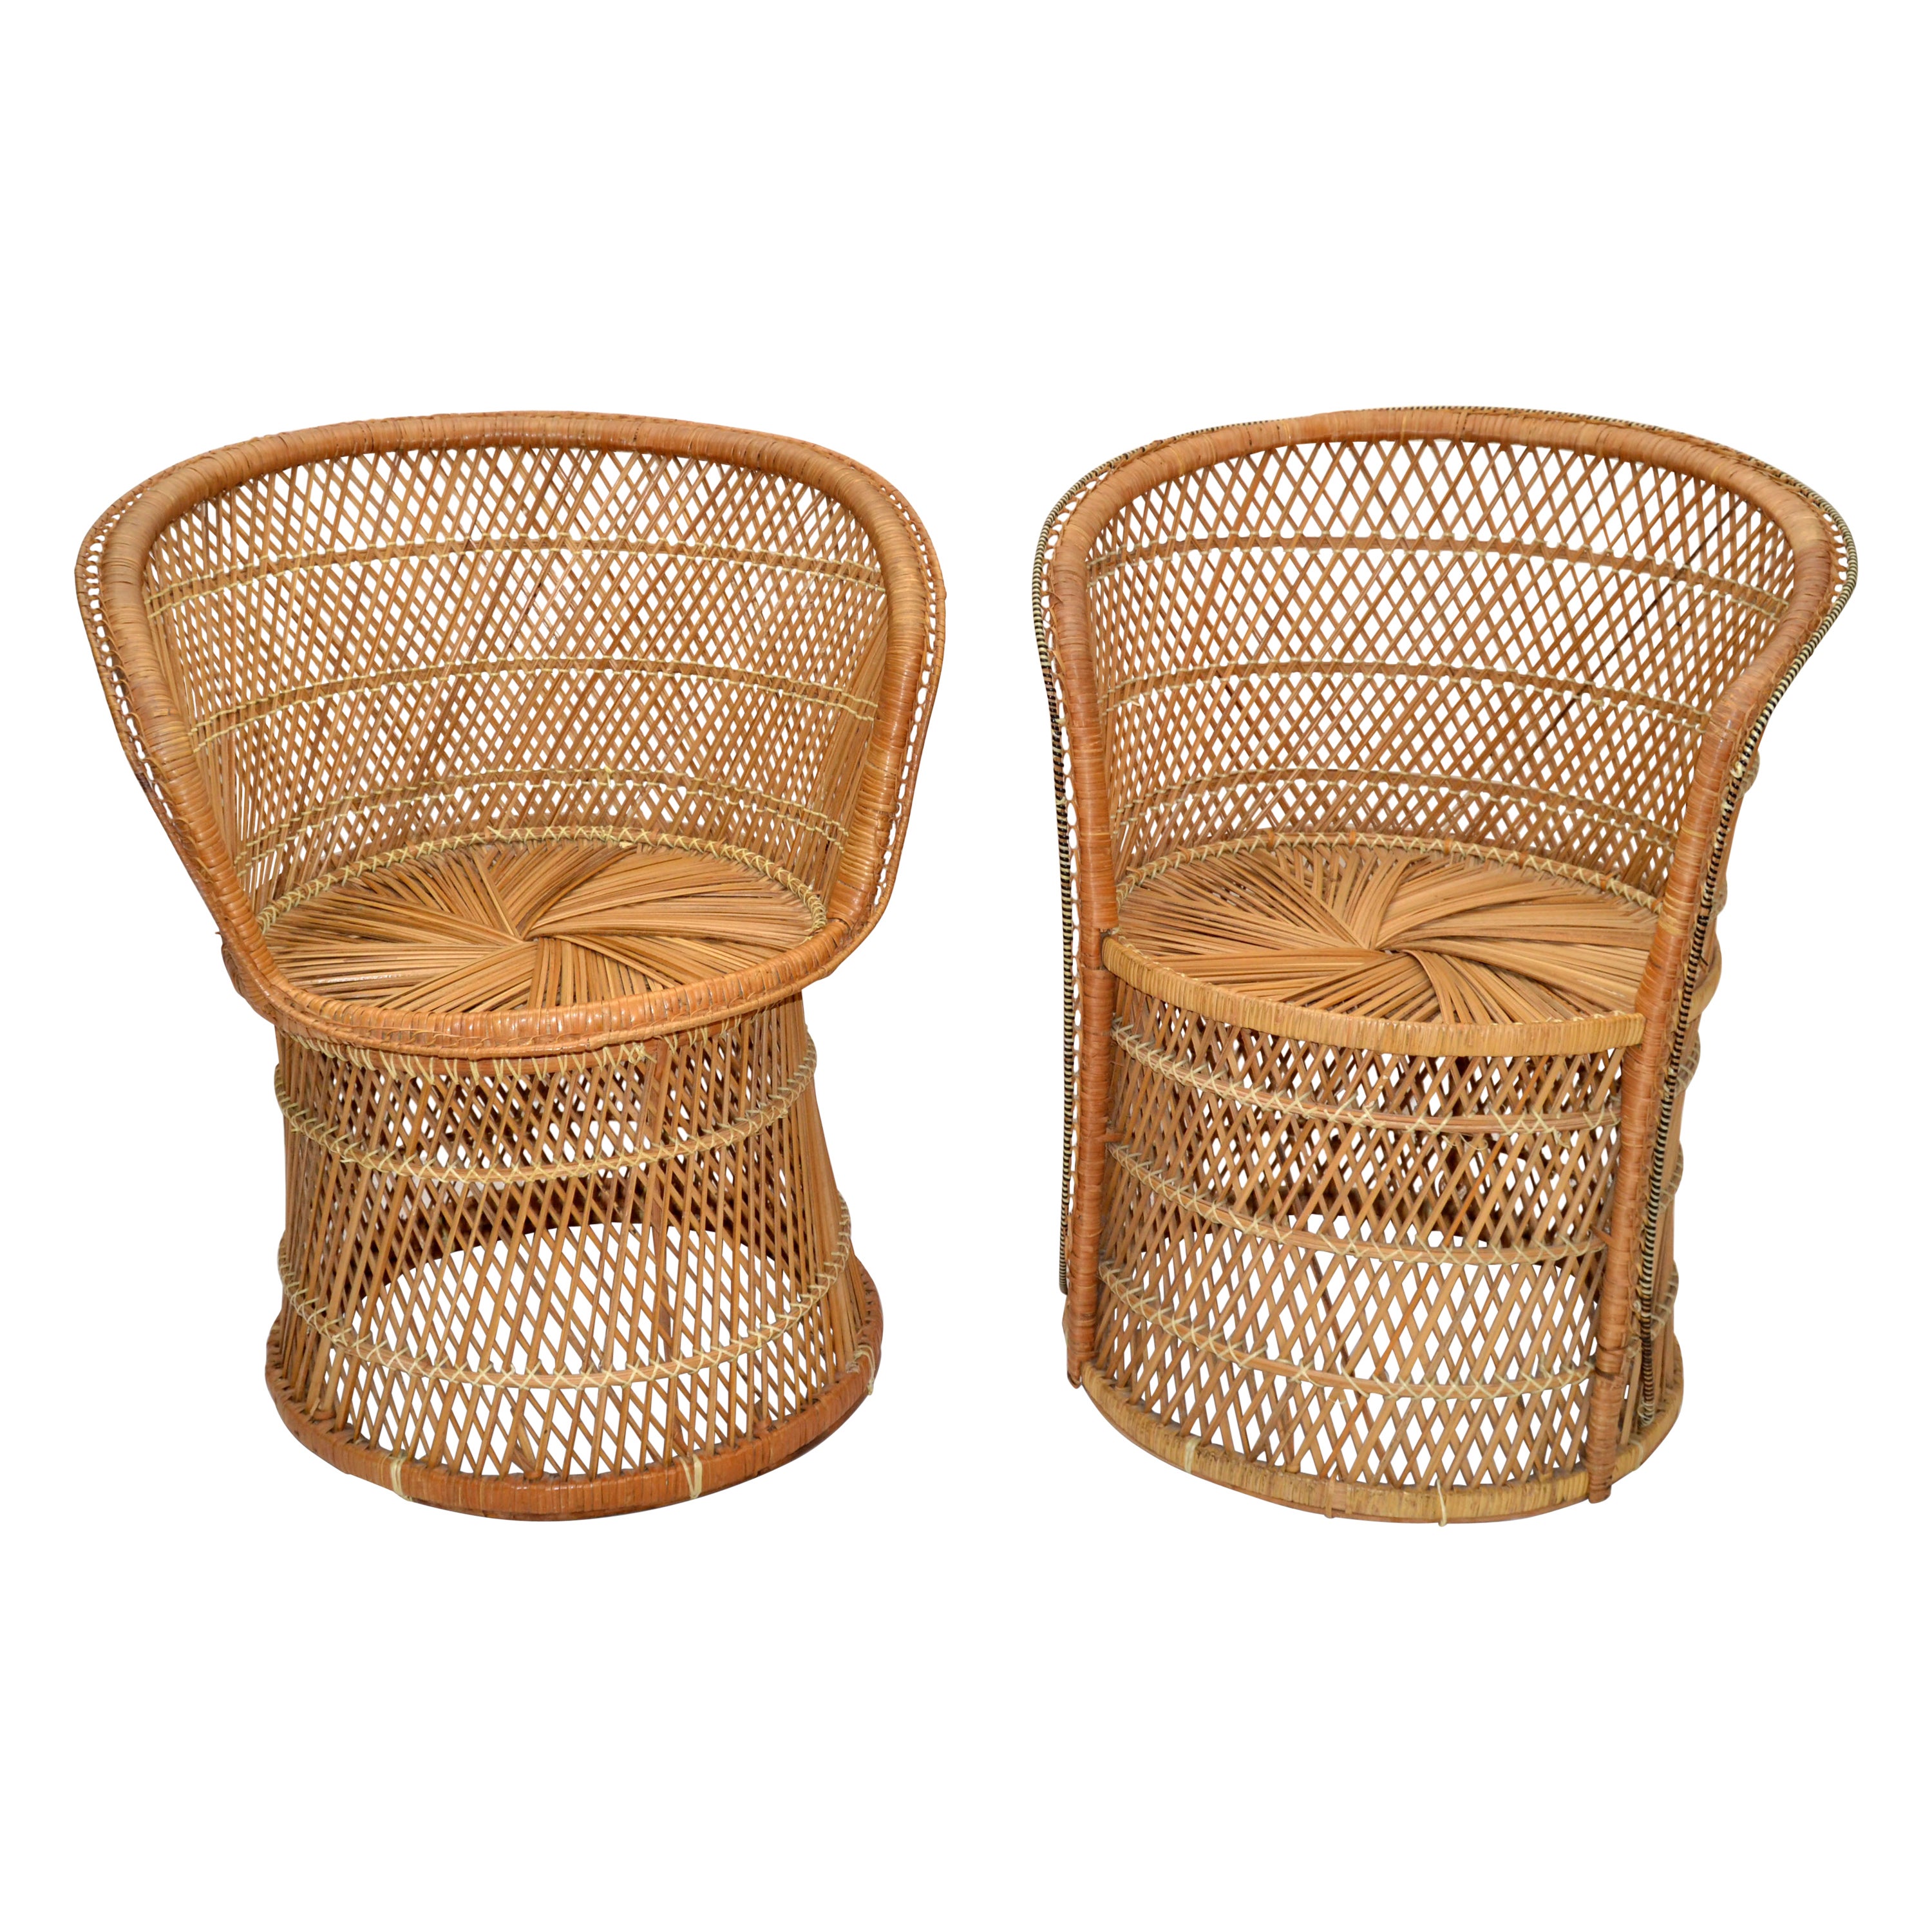 Him & Her Vintage Handwoven & Crafted Chinoiserie Rattan Cane & Bamboo Armchairs